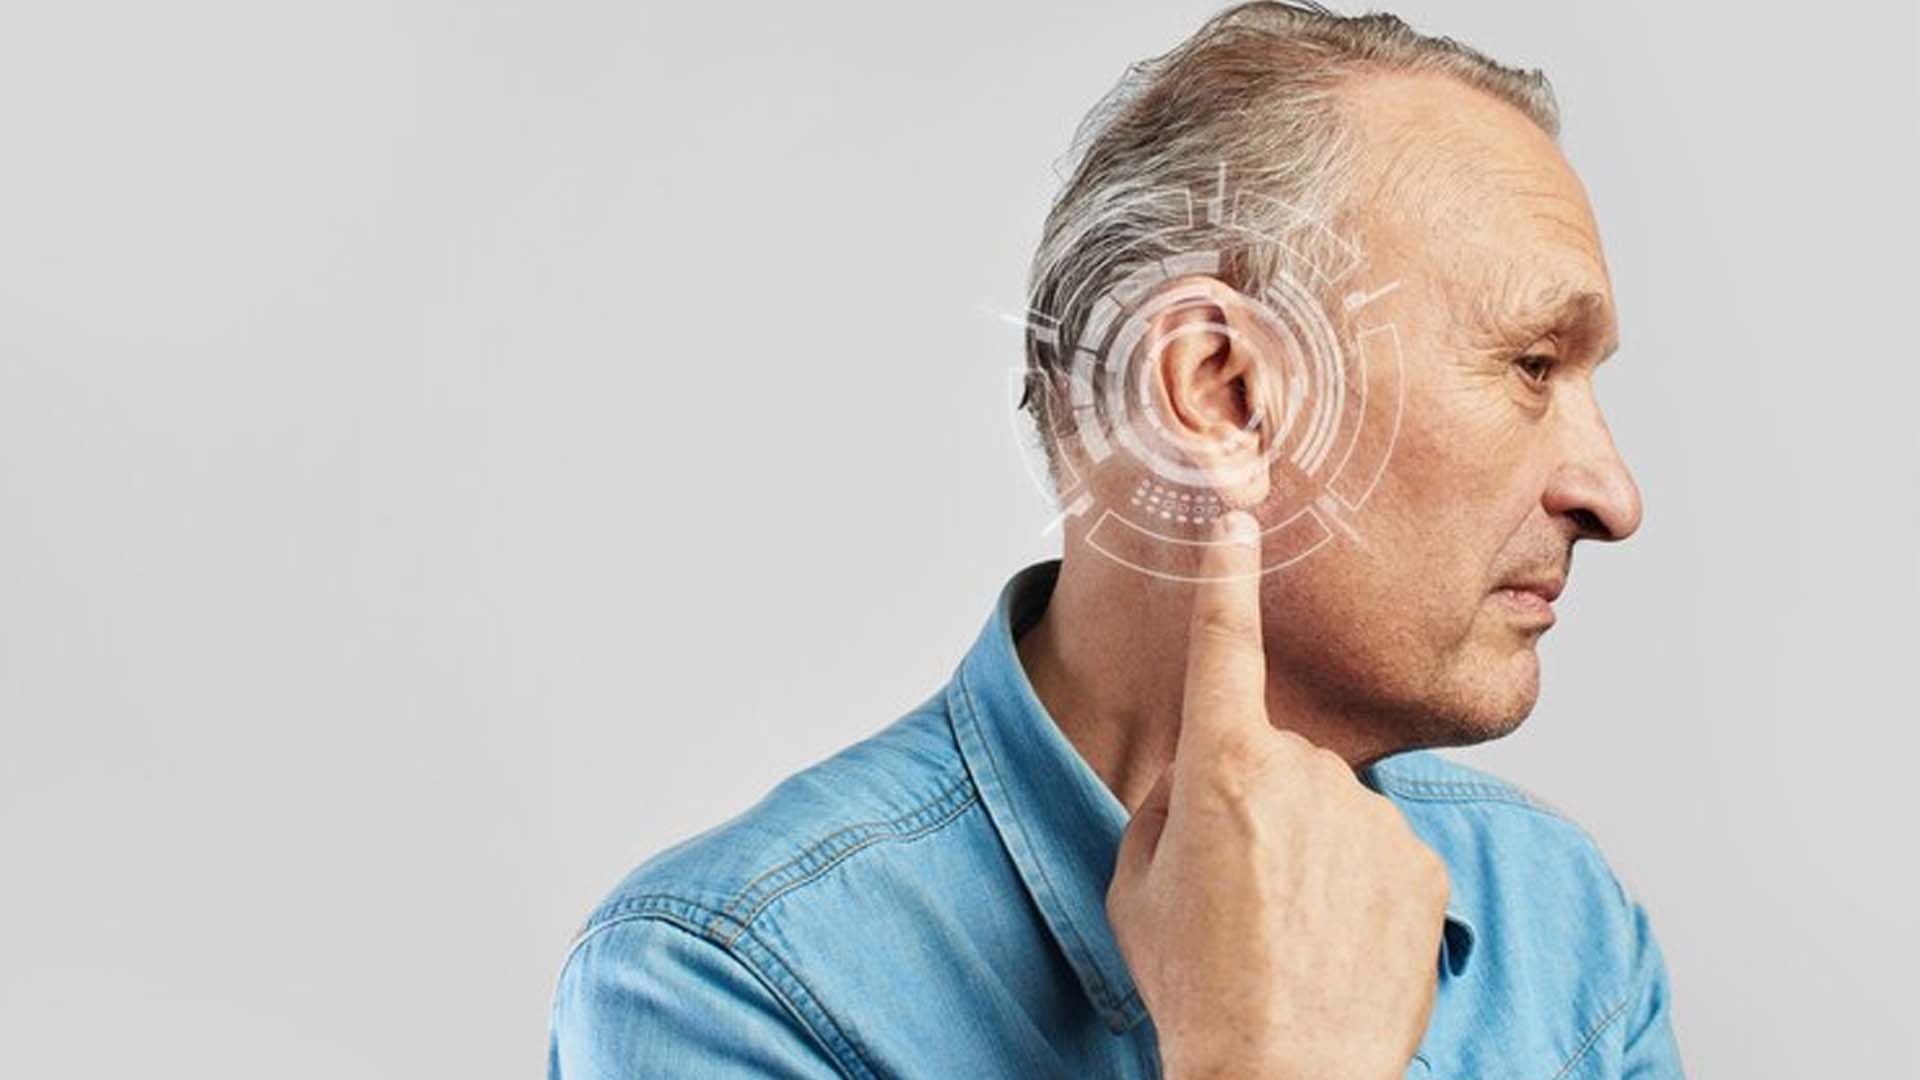 Man with Hearing Problem